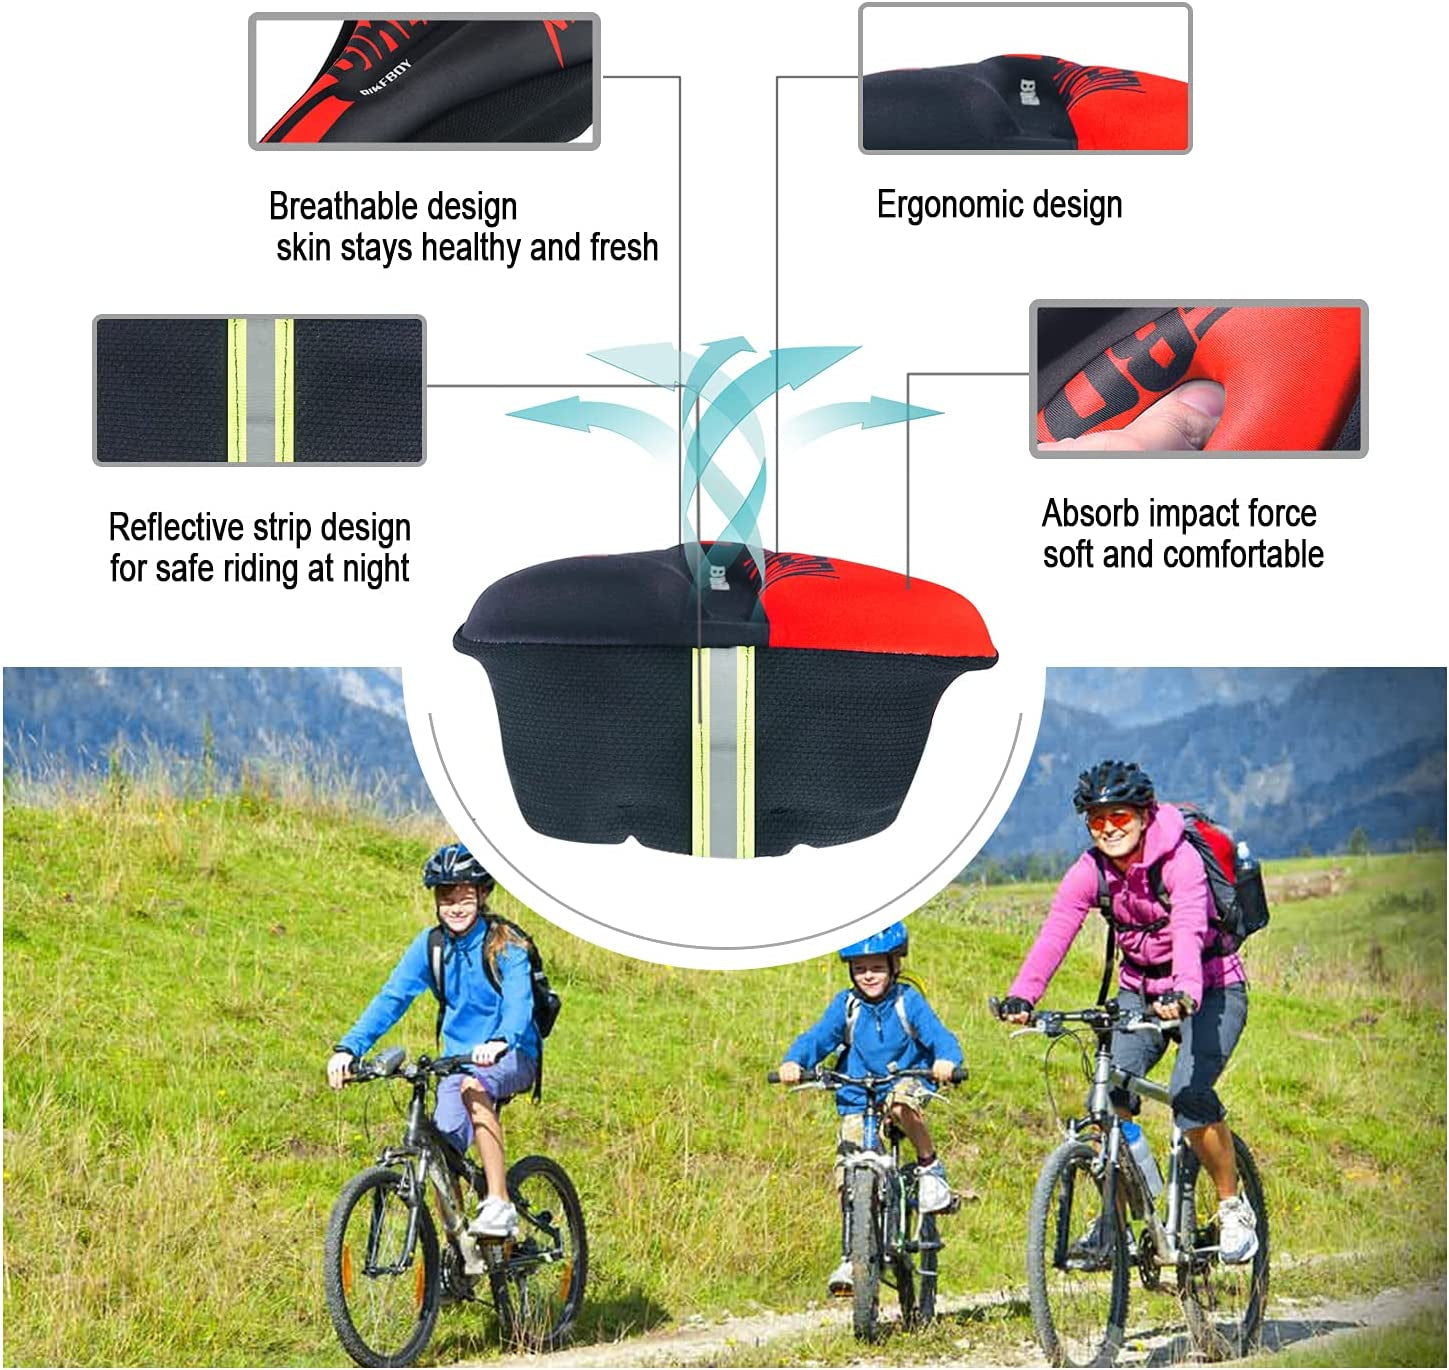  Padded Bike Seat Cover, Comfortable Gel Bike Seat Cushion for Men Women, Bicycle Seat Cushion Cover for Spin Bike, Stationary Bike, Indoor Outdoor Cycling